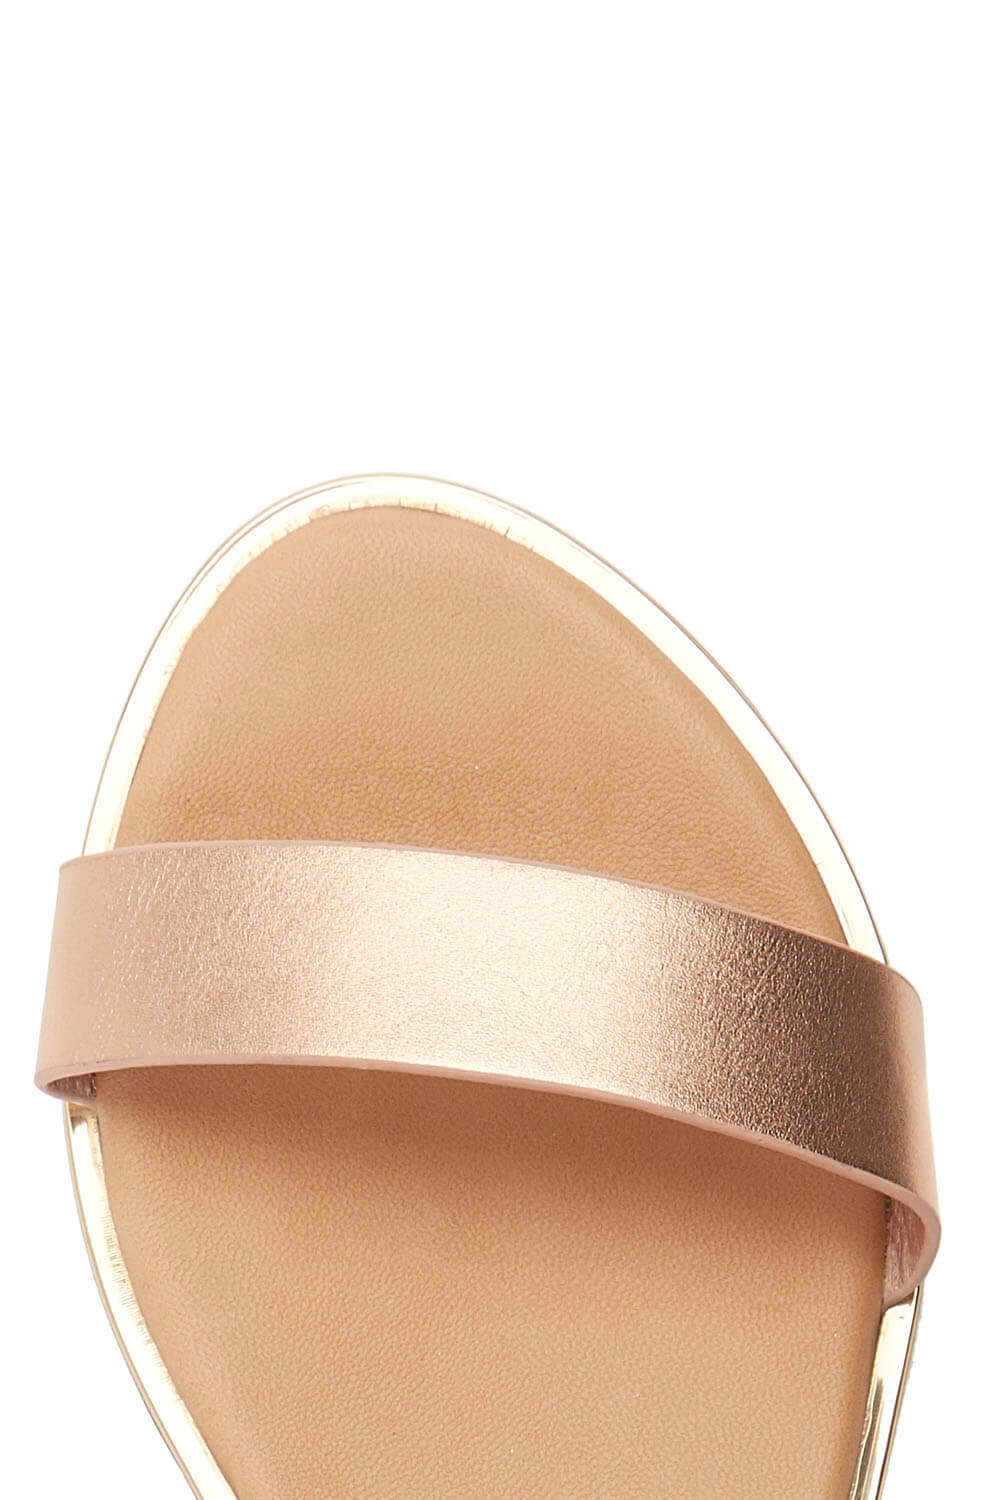 Rose Gold Casual Buckle Sandal, Image 5 of 5